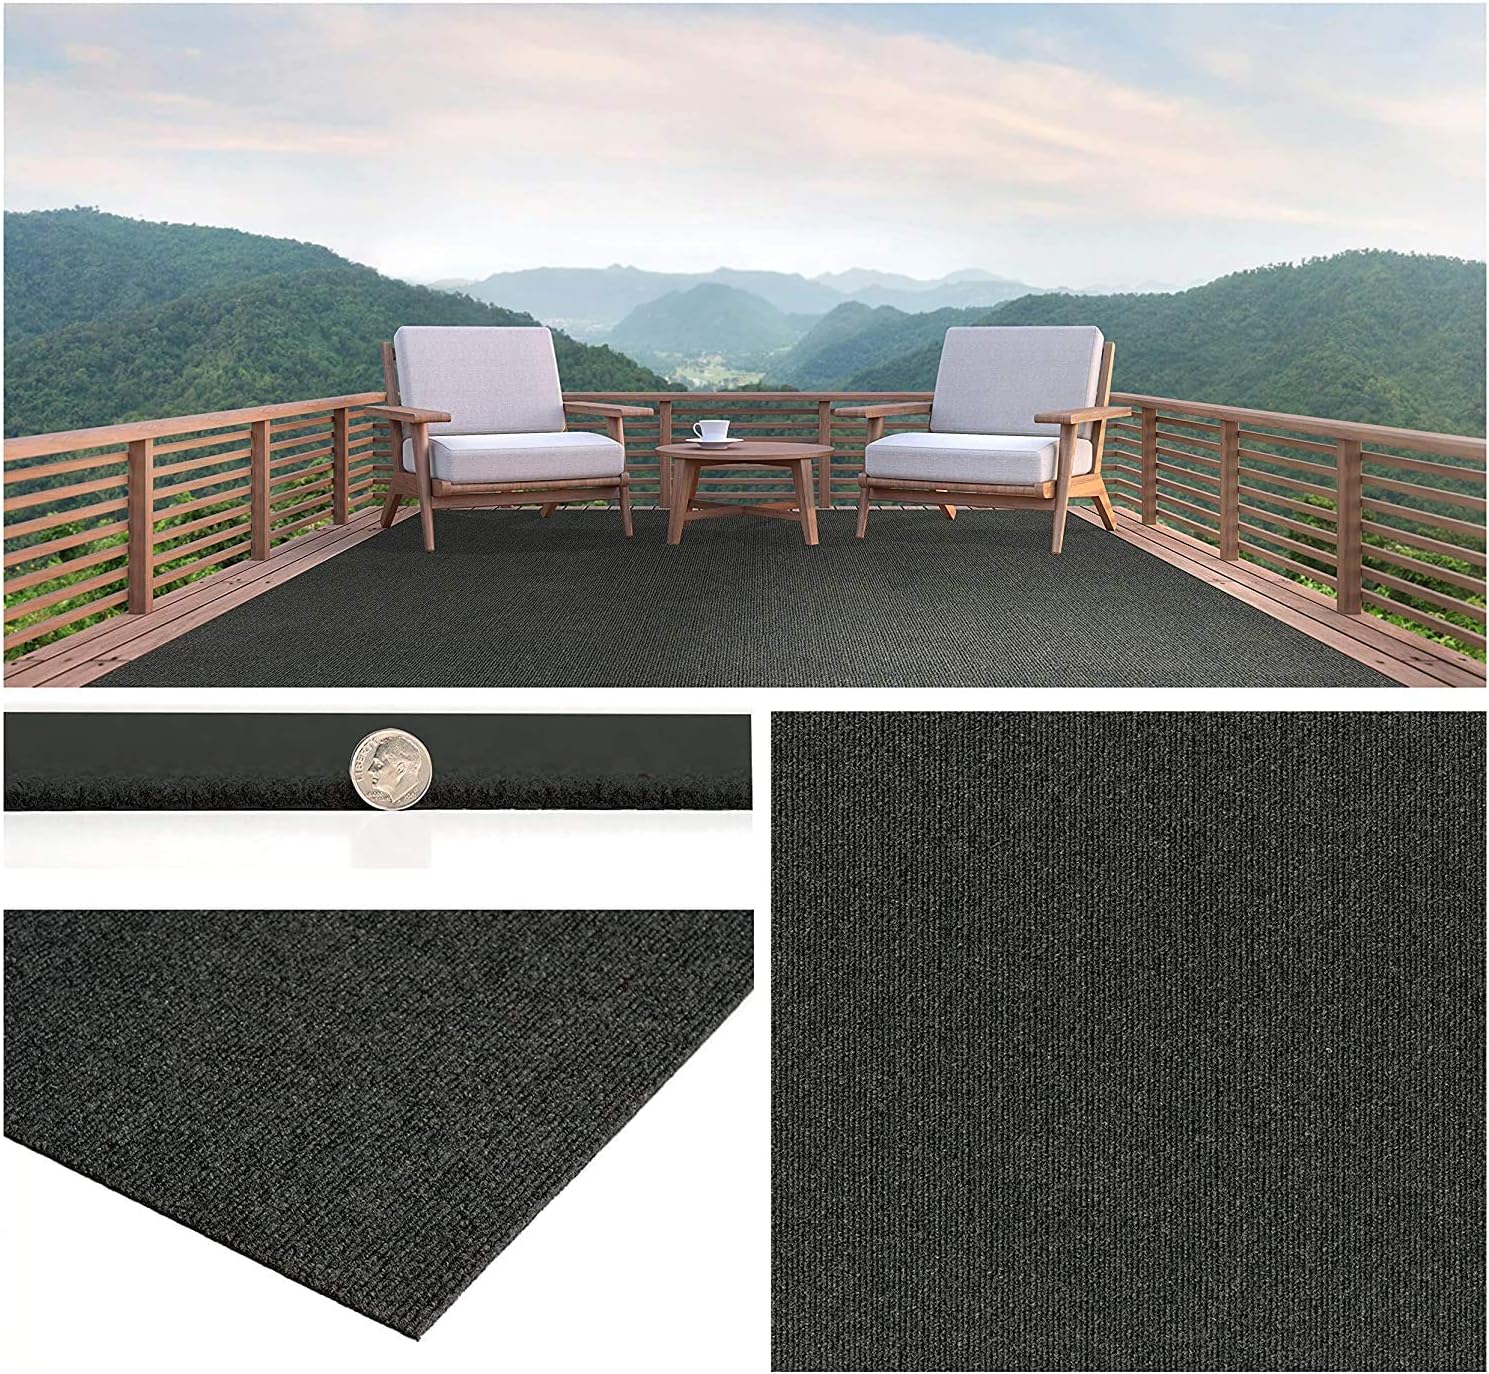 Koeckritz Rugs Durable Outdoor Area Rugs Constructed with Superior Soft PET Fiber (Color: Black Ice) Made from 100% Purified Recycled Bottles